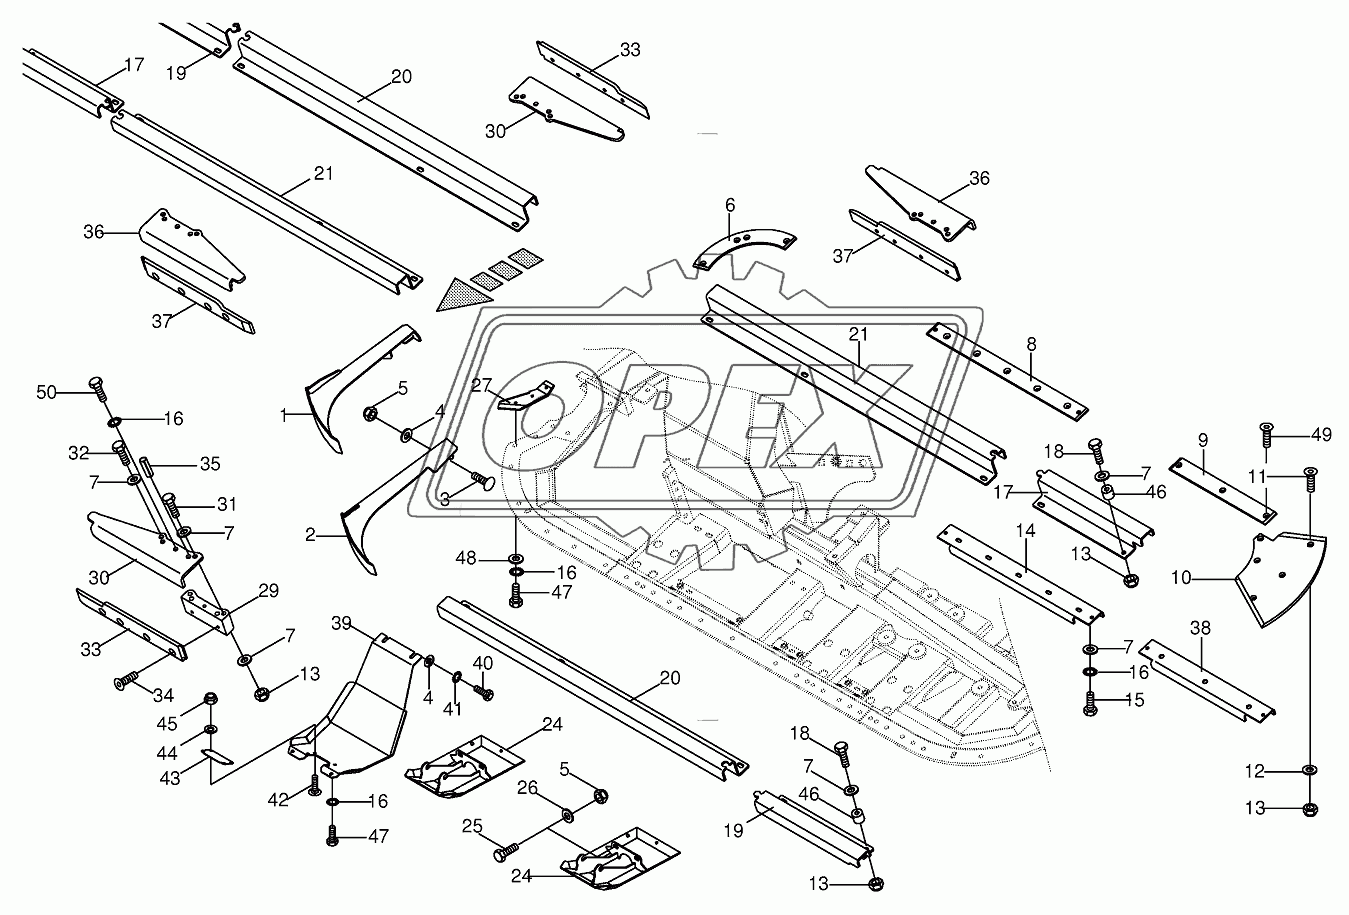 Mounting parts-lateral